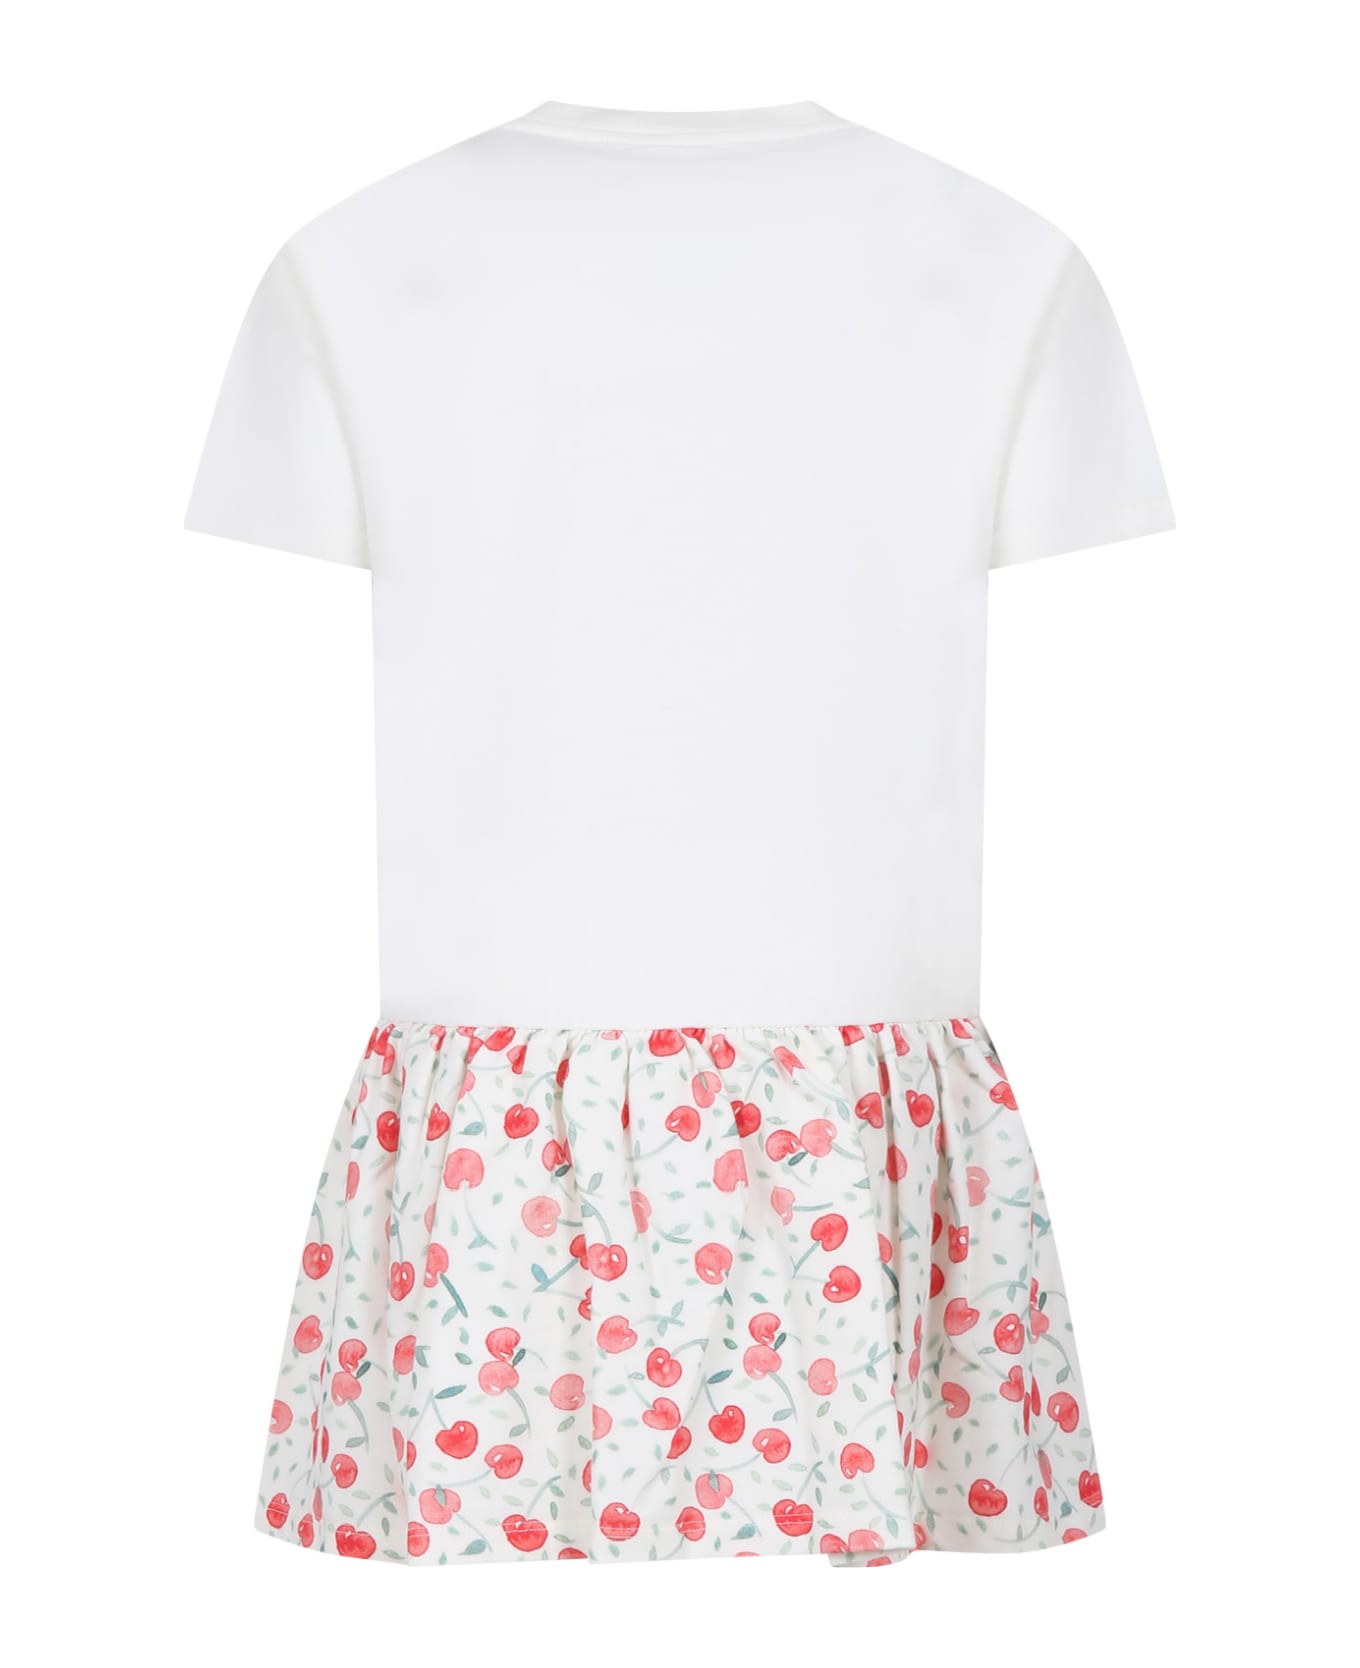 Bonpoint White Dress For Girl With Cherries Print - Off white